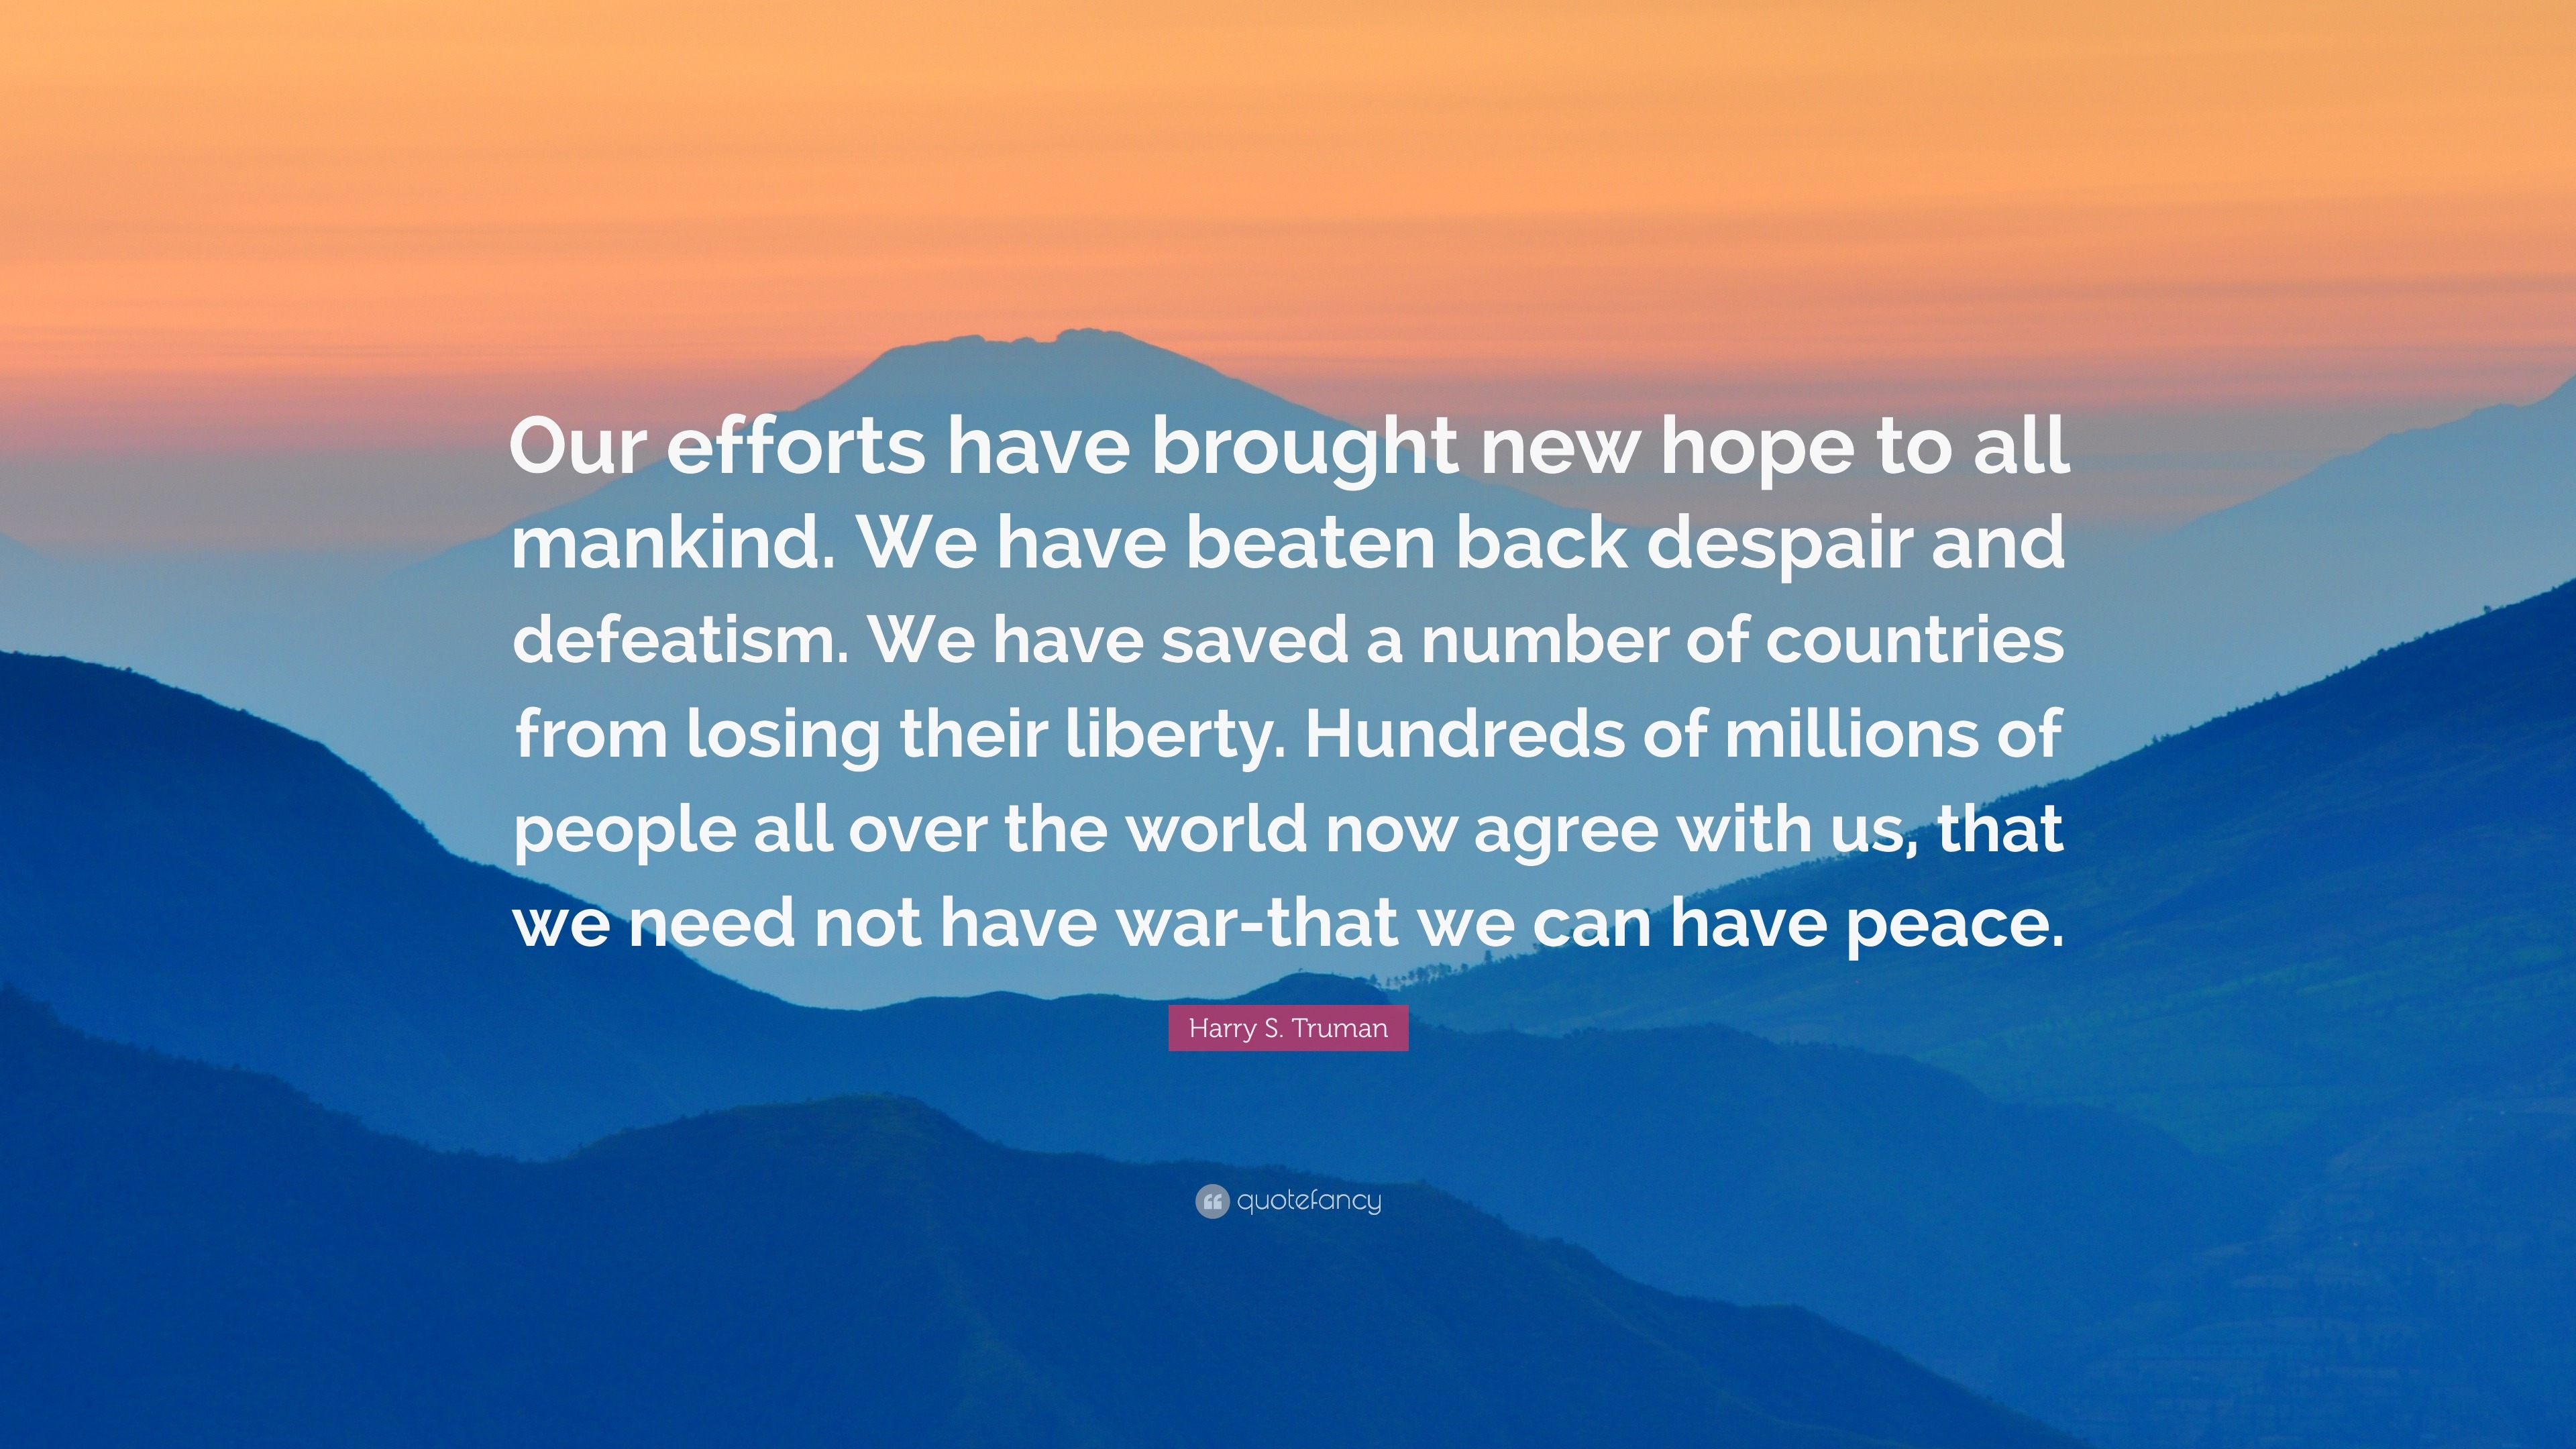 https://quotefancy.com/media/wallpaper/3840x2160/542417-Harry-S-Truman-Quote-Our-efforts-have-brought-new-hope-to-all.jpg